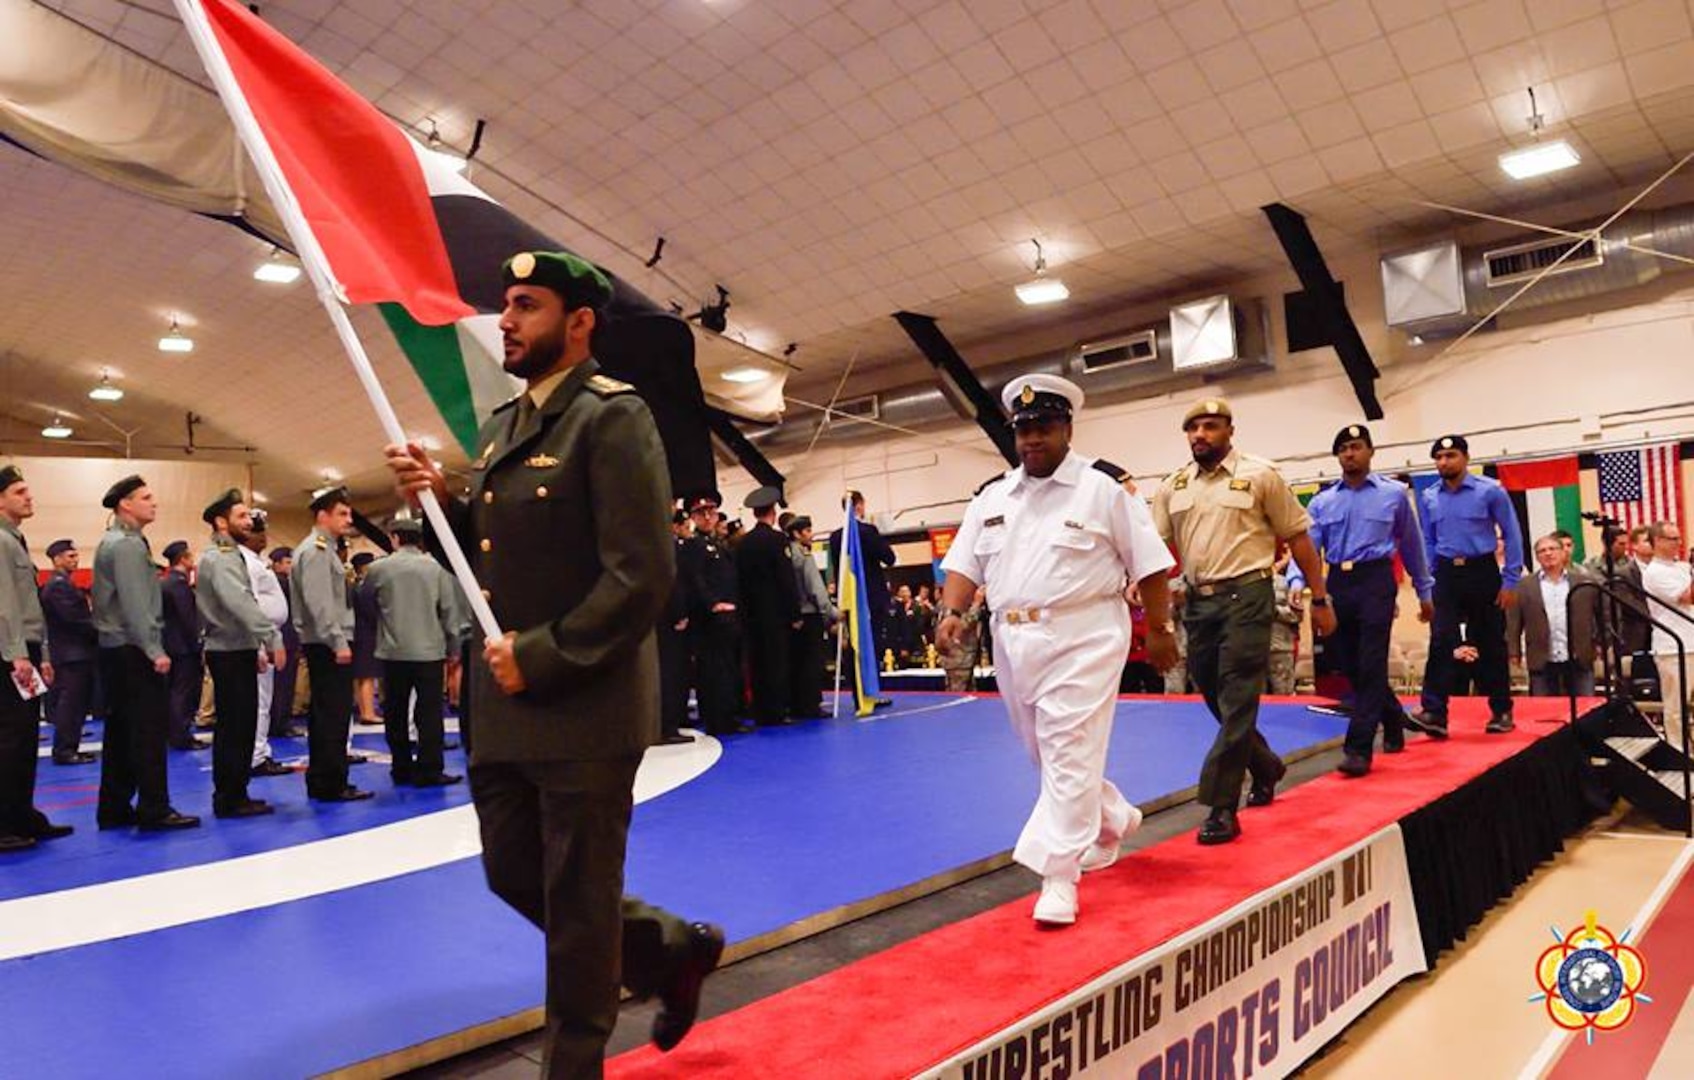 The Delegation from the United Arab Emirates during the Opening Ceremony of the 29th CISM World Military Wrestling Championship at Joint Base McGuire-Dix-Lakehurst (MDL), New Jersey 1-8 October